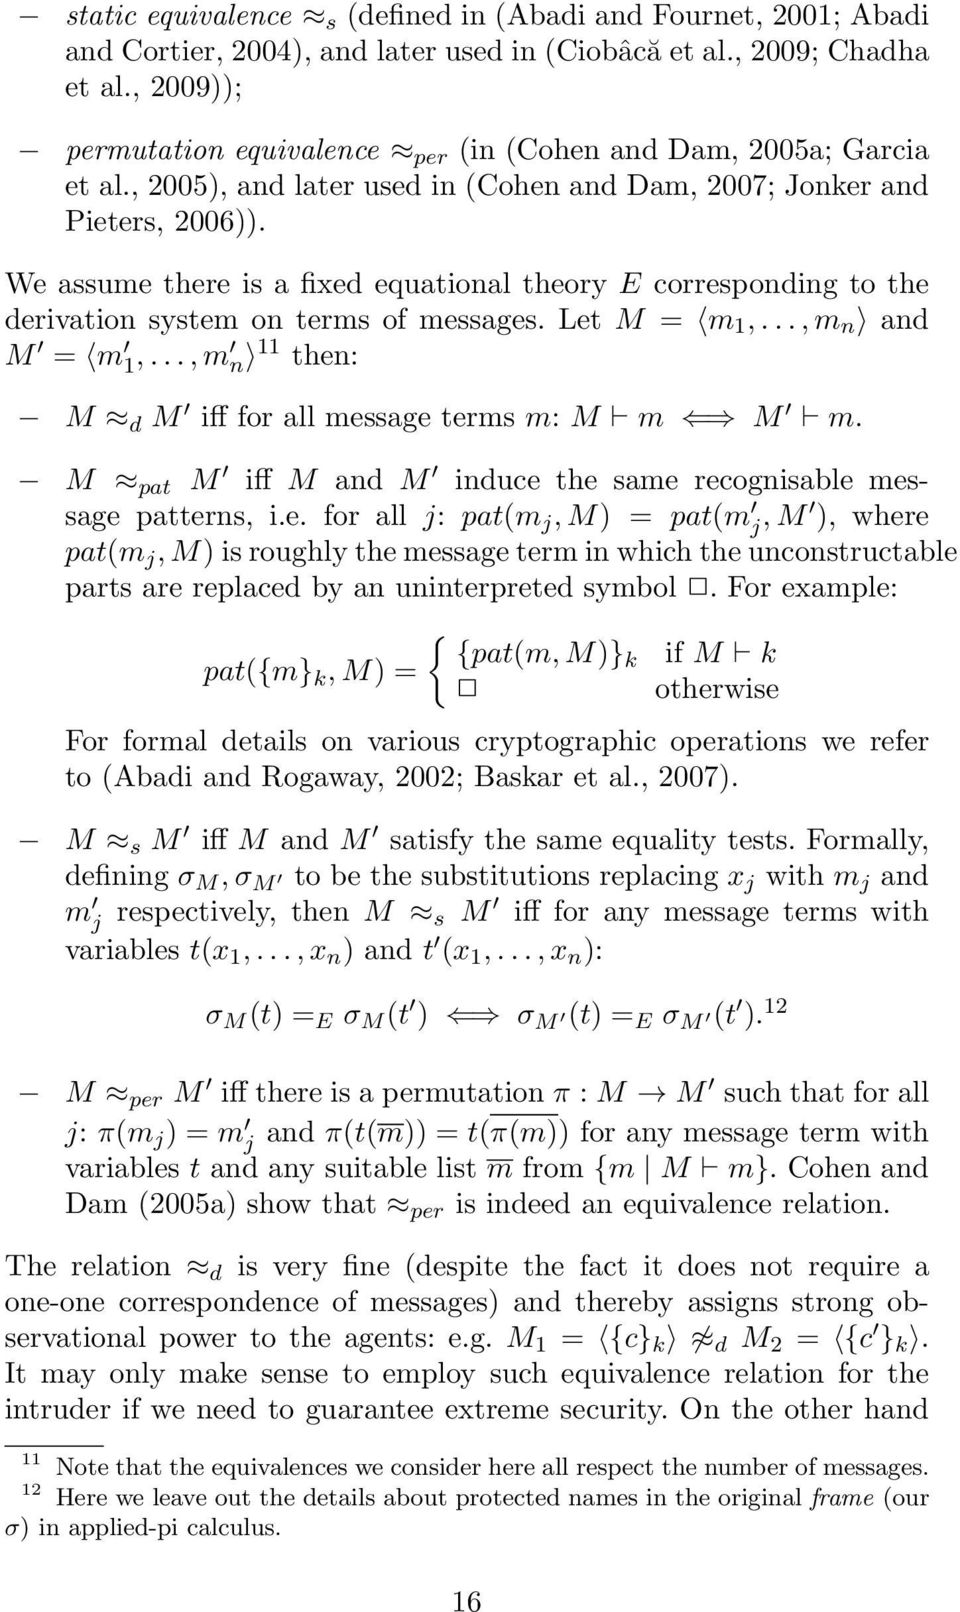 We assume there is a fixed equational theory E corresponding to the derivation system on terms of messages. Let M = m 1,..., m n and M = m 1,..., m n 11 then: M d M iff for all message terms m: M m M m.